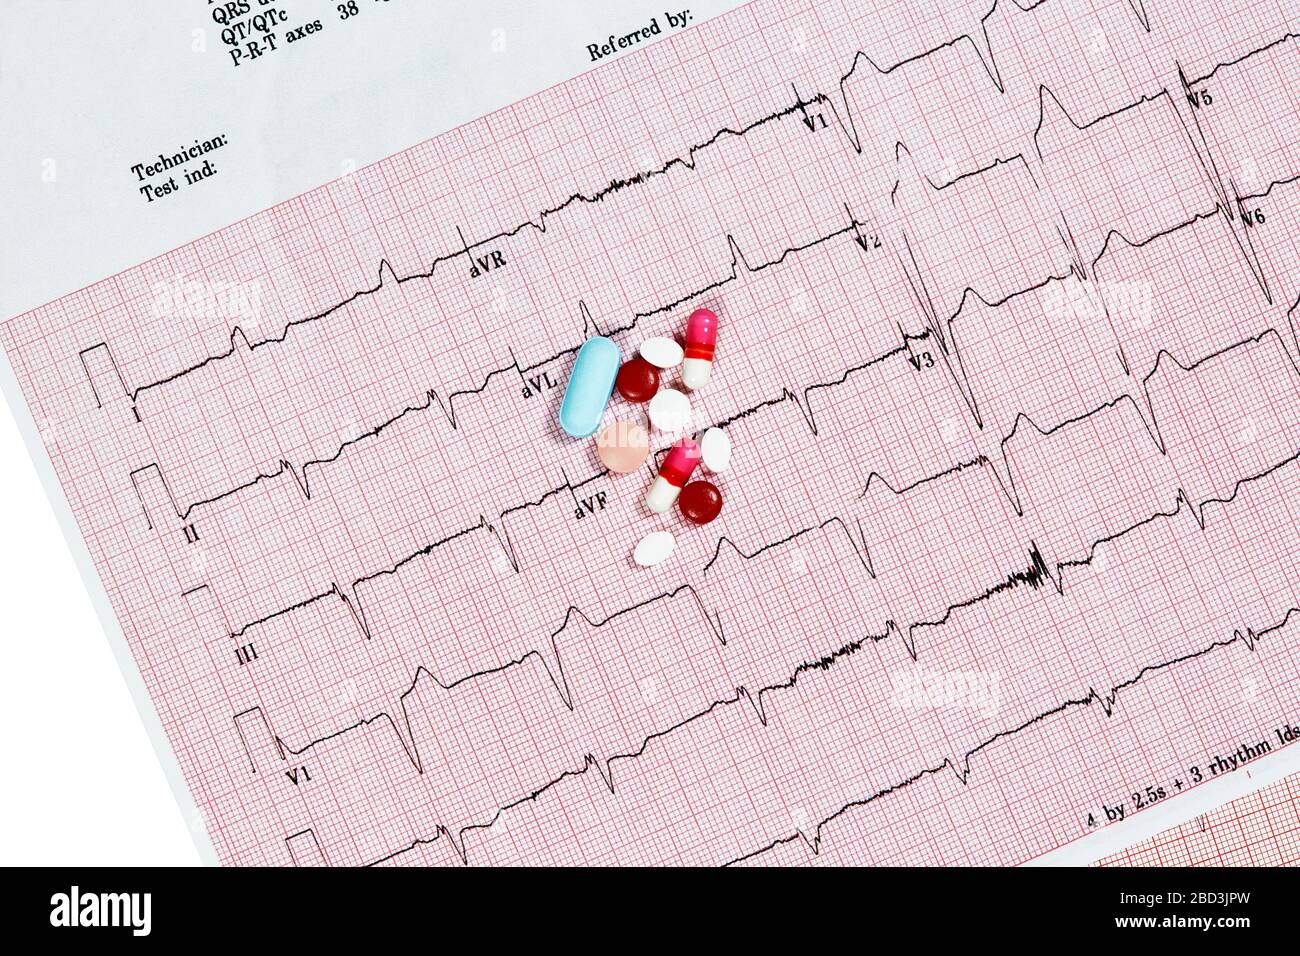 Close Up Echocardiograph test report (ECG) showing abnormal heart rhythm with medication Stock Photo